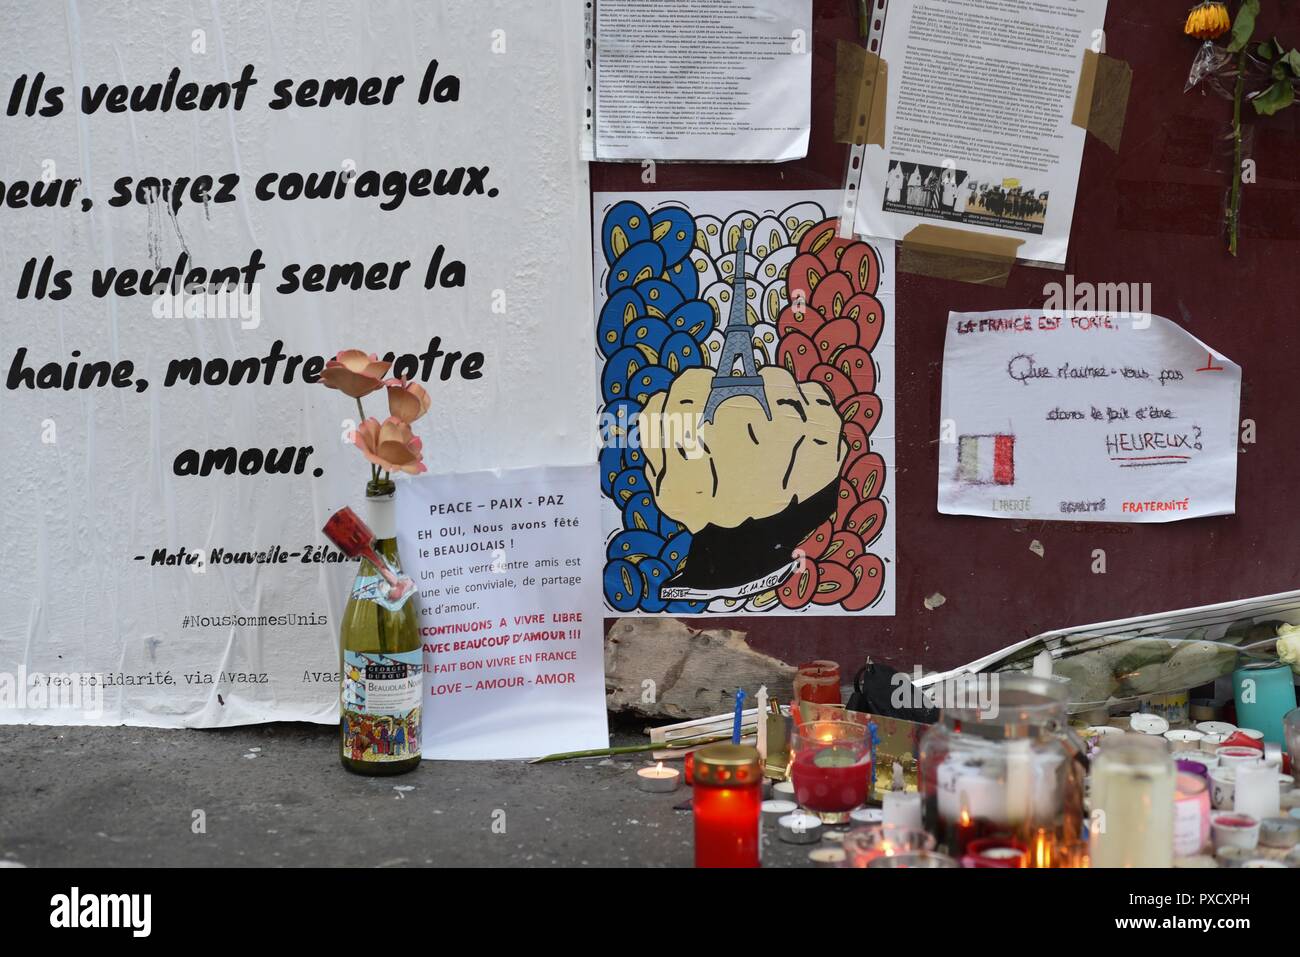 November 22, 2015 - Paris, France: People pay tribute to the victims of the November 13 terror attacks with candles, drawings, street arts, and pictures of the dead with impromptu memorial near the the Carillon bar and the Petit Cambodge restaurant.  Memorial improvise aux victimes du 13 novembre 2015 pres du bar Le Carillon et du restaurant Le Petit Cambdoge. *** FRANCE OUT / NO SALES TO FRENCH MEDIA *** Stock Photo